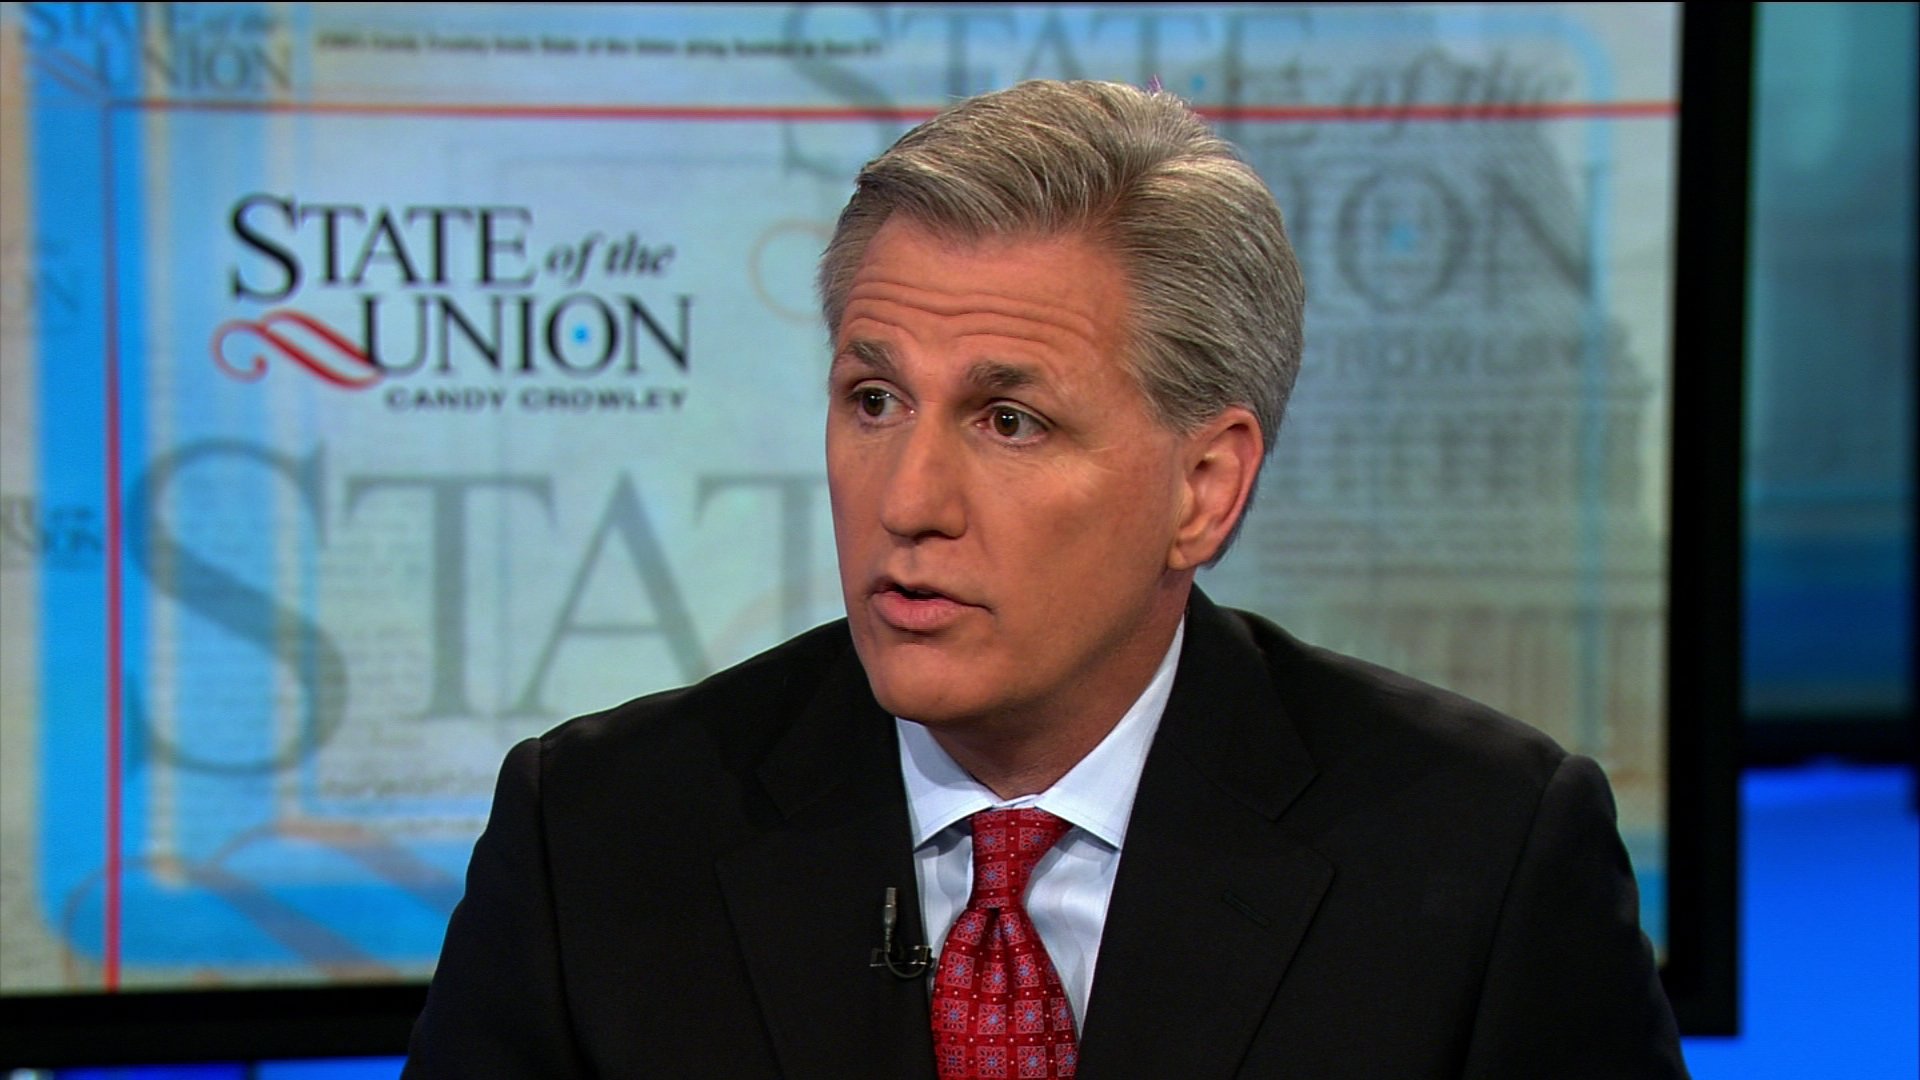 File- Kevin McCarthy, (R-CA), appears on CNN's State of the Union with Candy Crowley on July 10, 2011. McCarthy represents California's 23rd District and is the House Majority Leader.